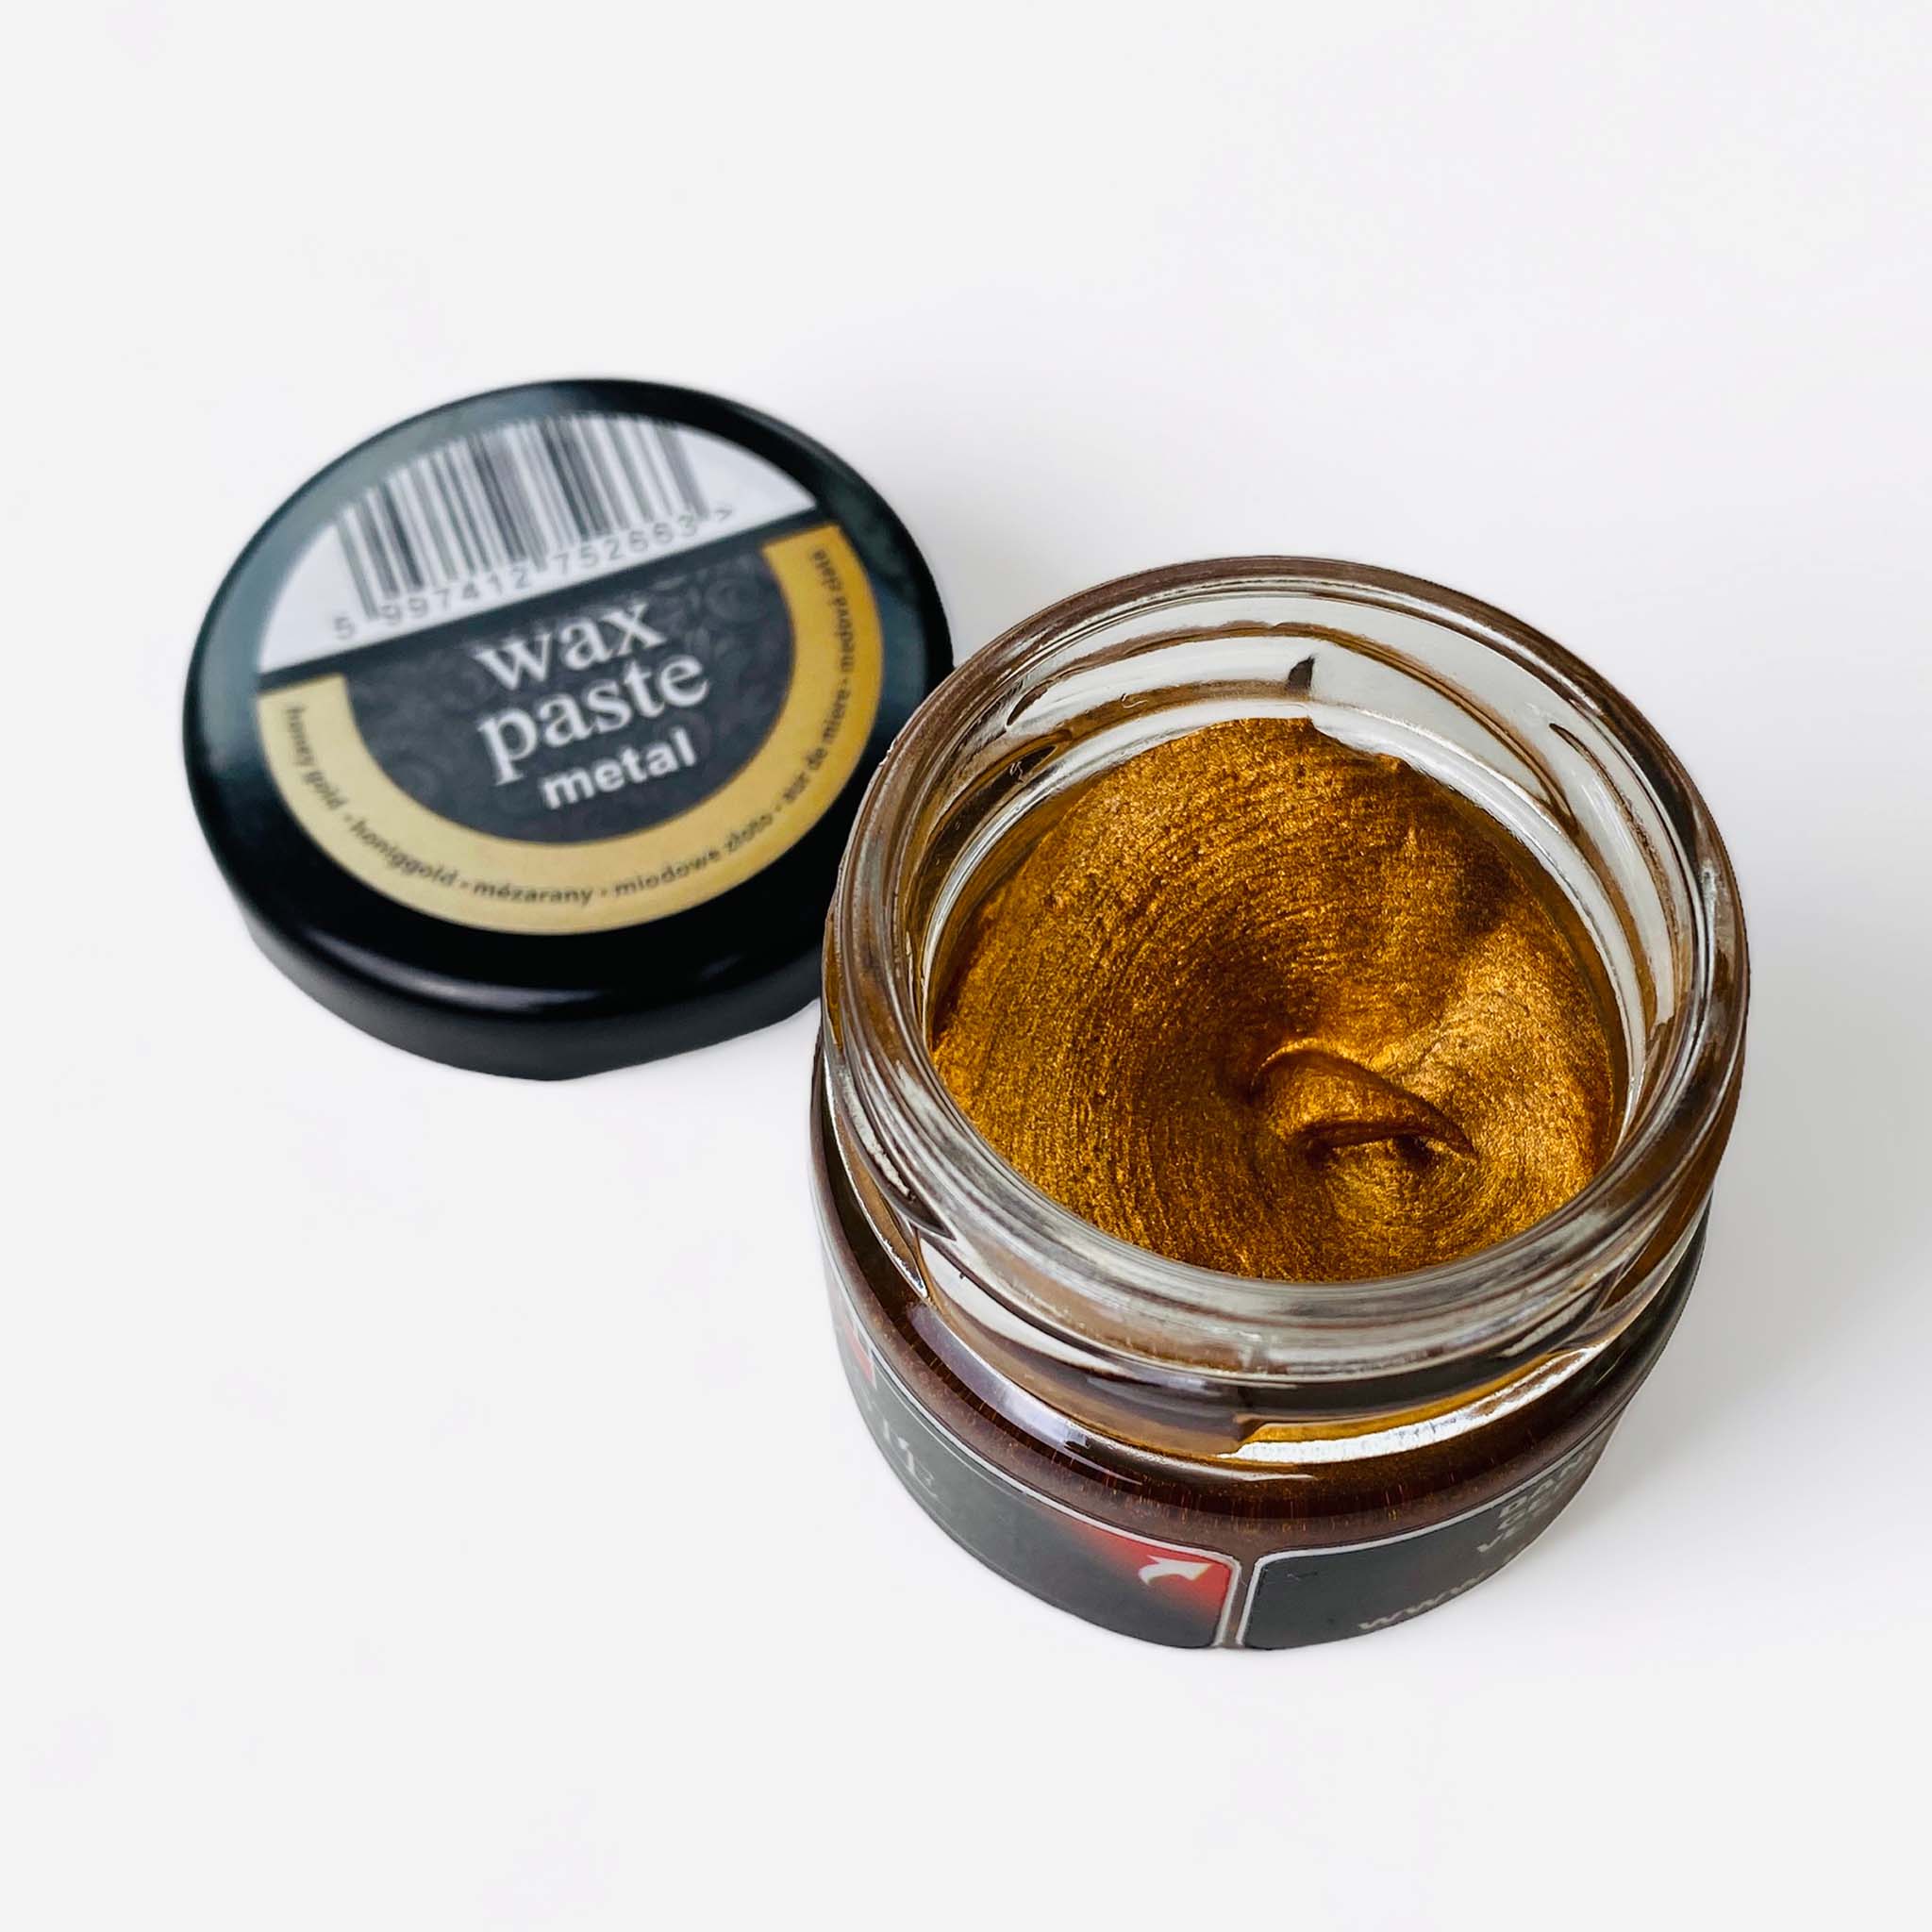 An open jar of a 20ml/0.68 ounce jar of metallic Honey Gold Wax Paste by Pentart is against a white background.